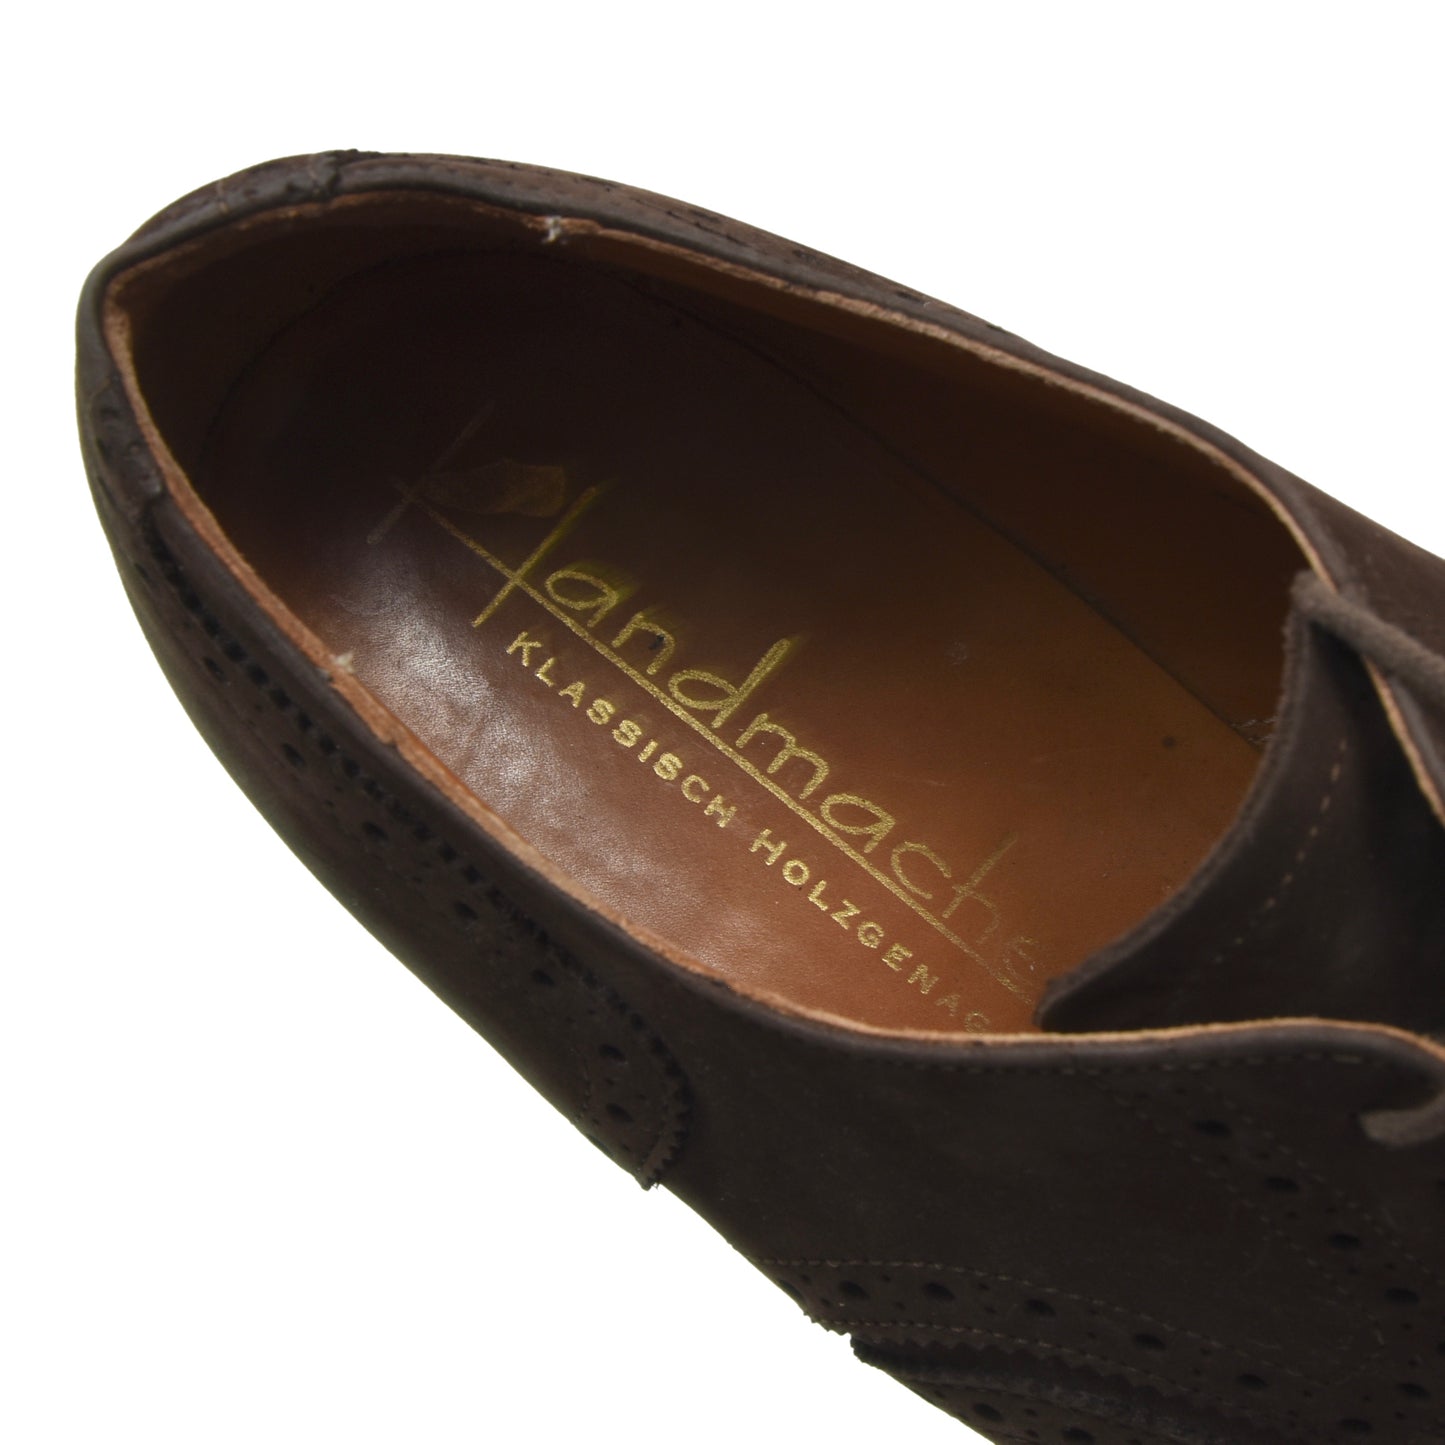 Handmacher Leather Shoes Size 9.5 - Brown